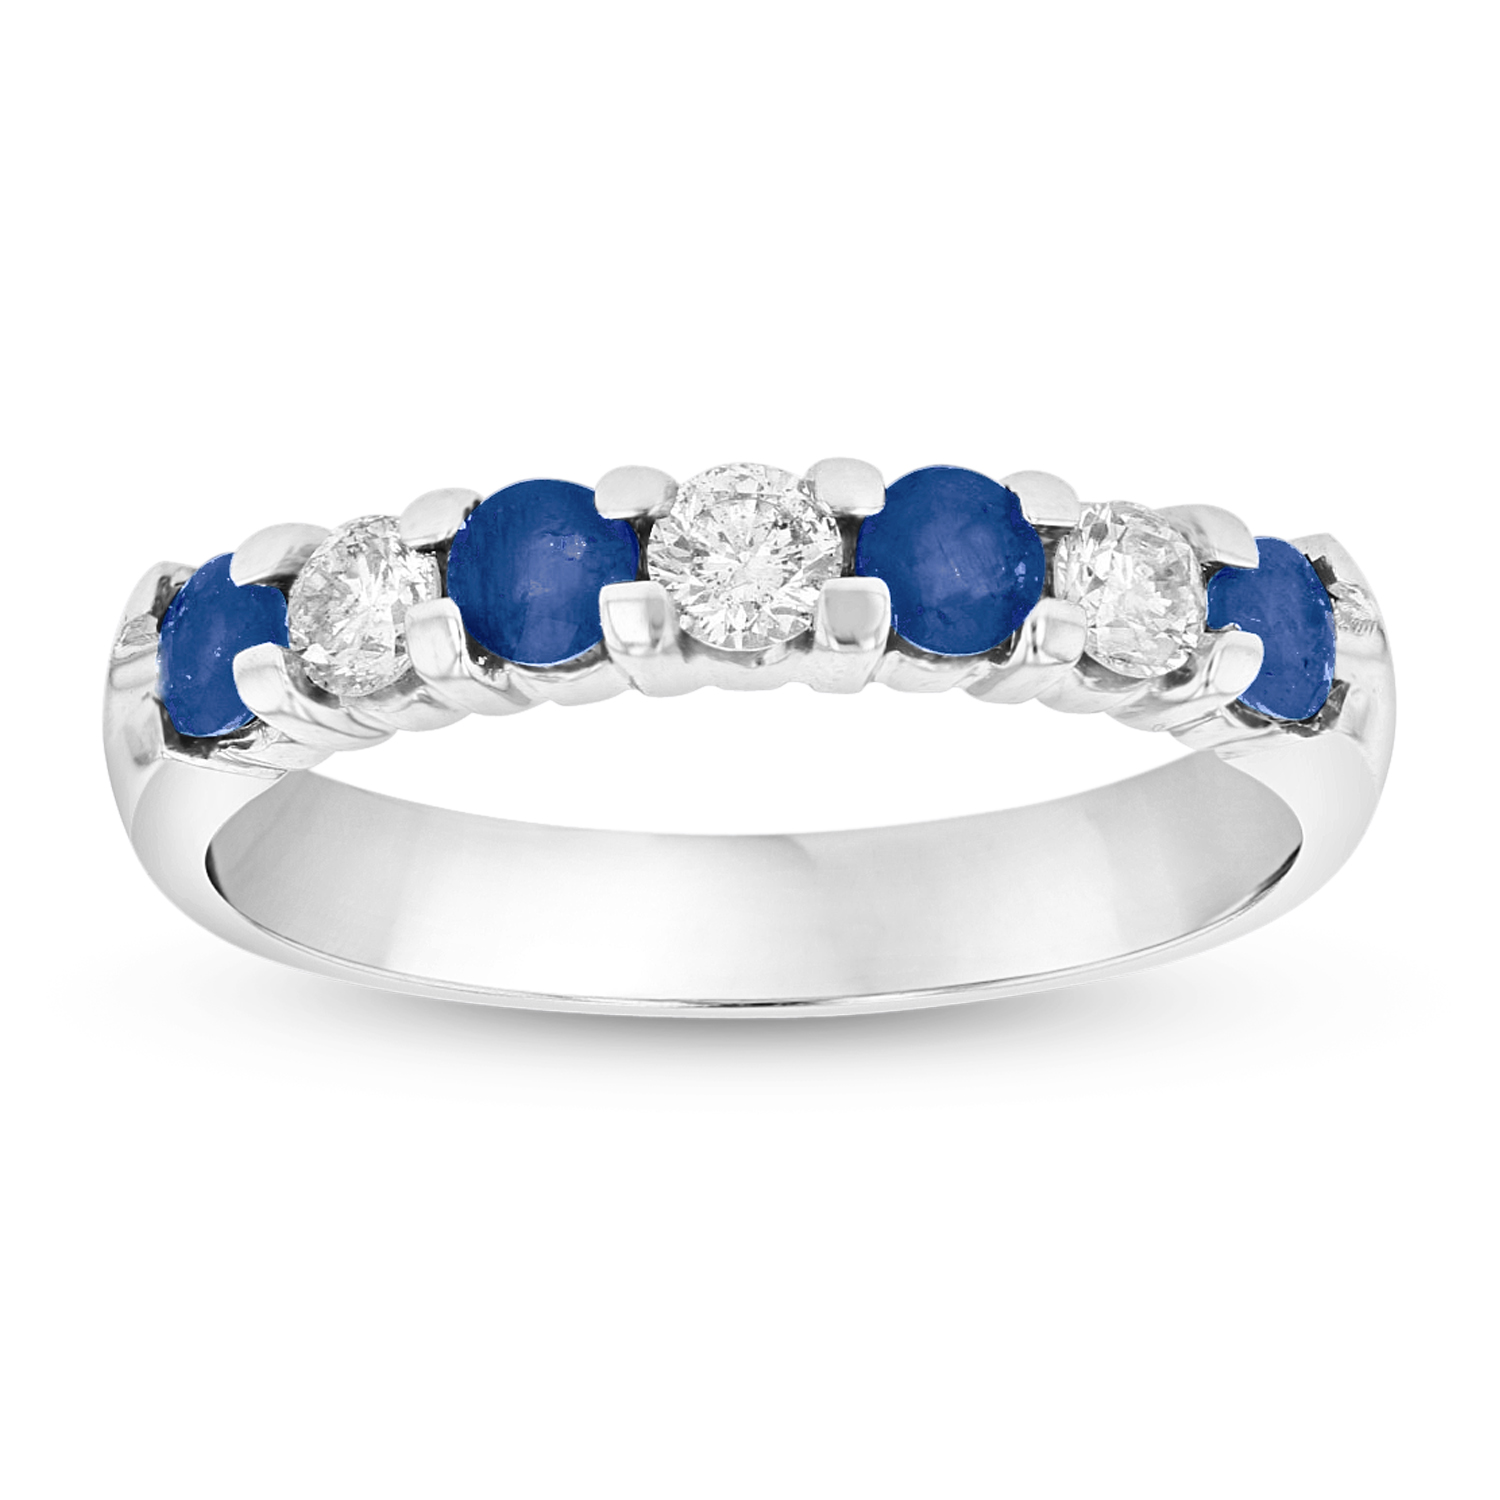 View 14K Gold Ring 0.78ct tw Round Diamonds and Sapphires Prong Set Band